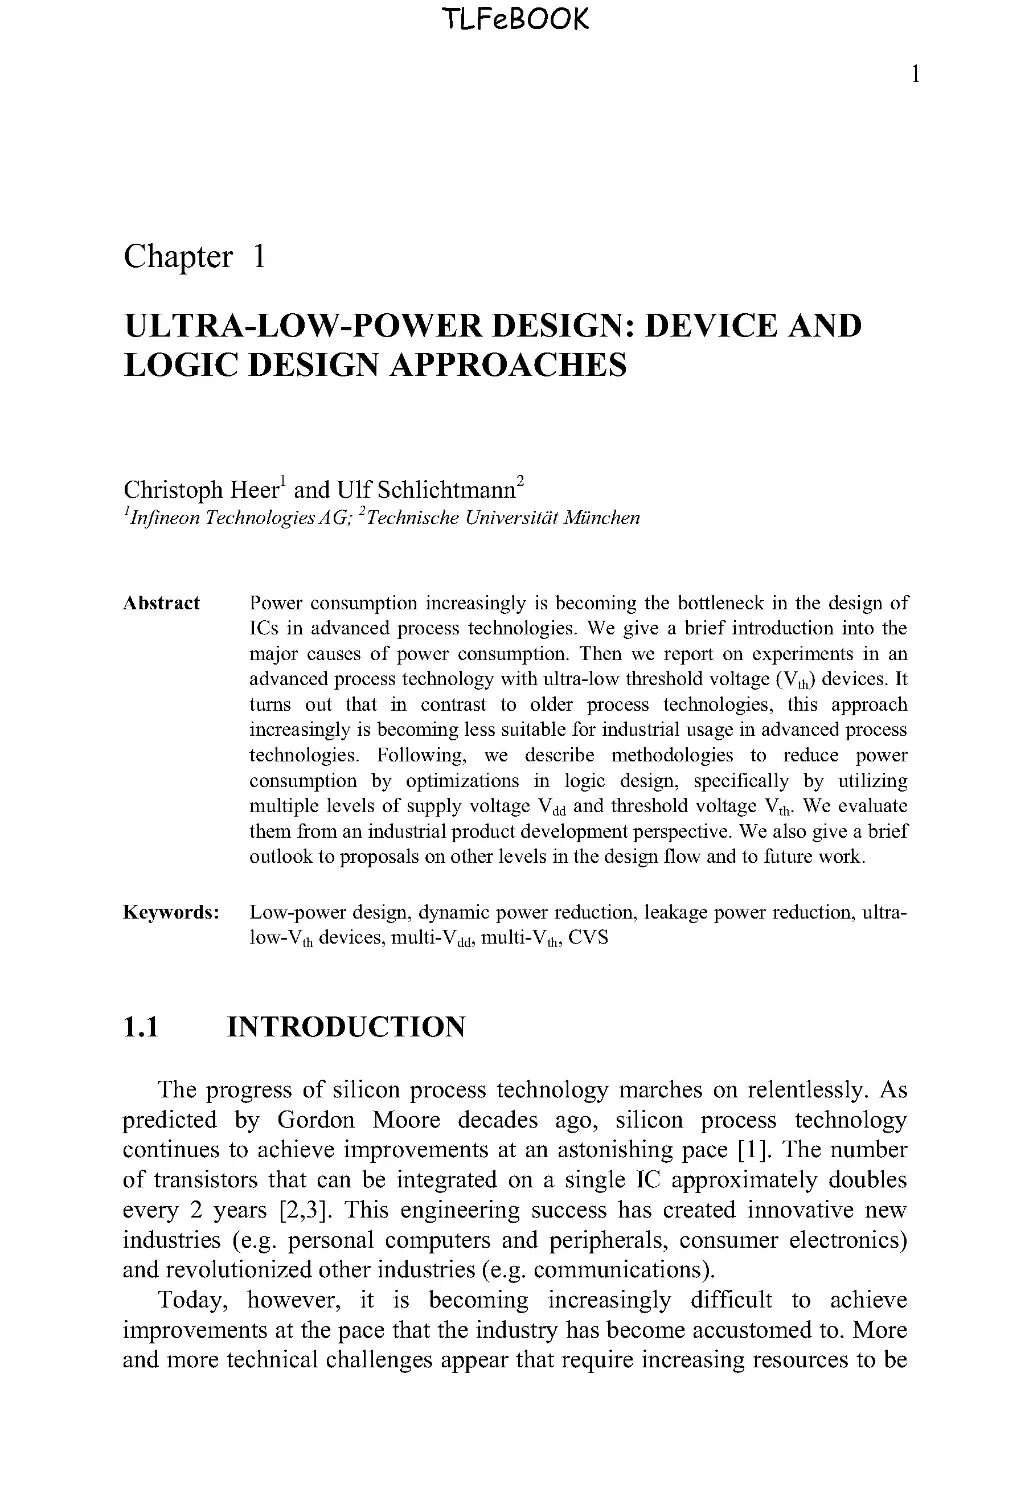 1. ULTRA-LOW-POWER DESIGN: DEVICE AND LOGIC DESIGN APPROACHES